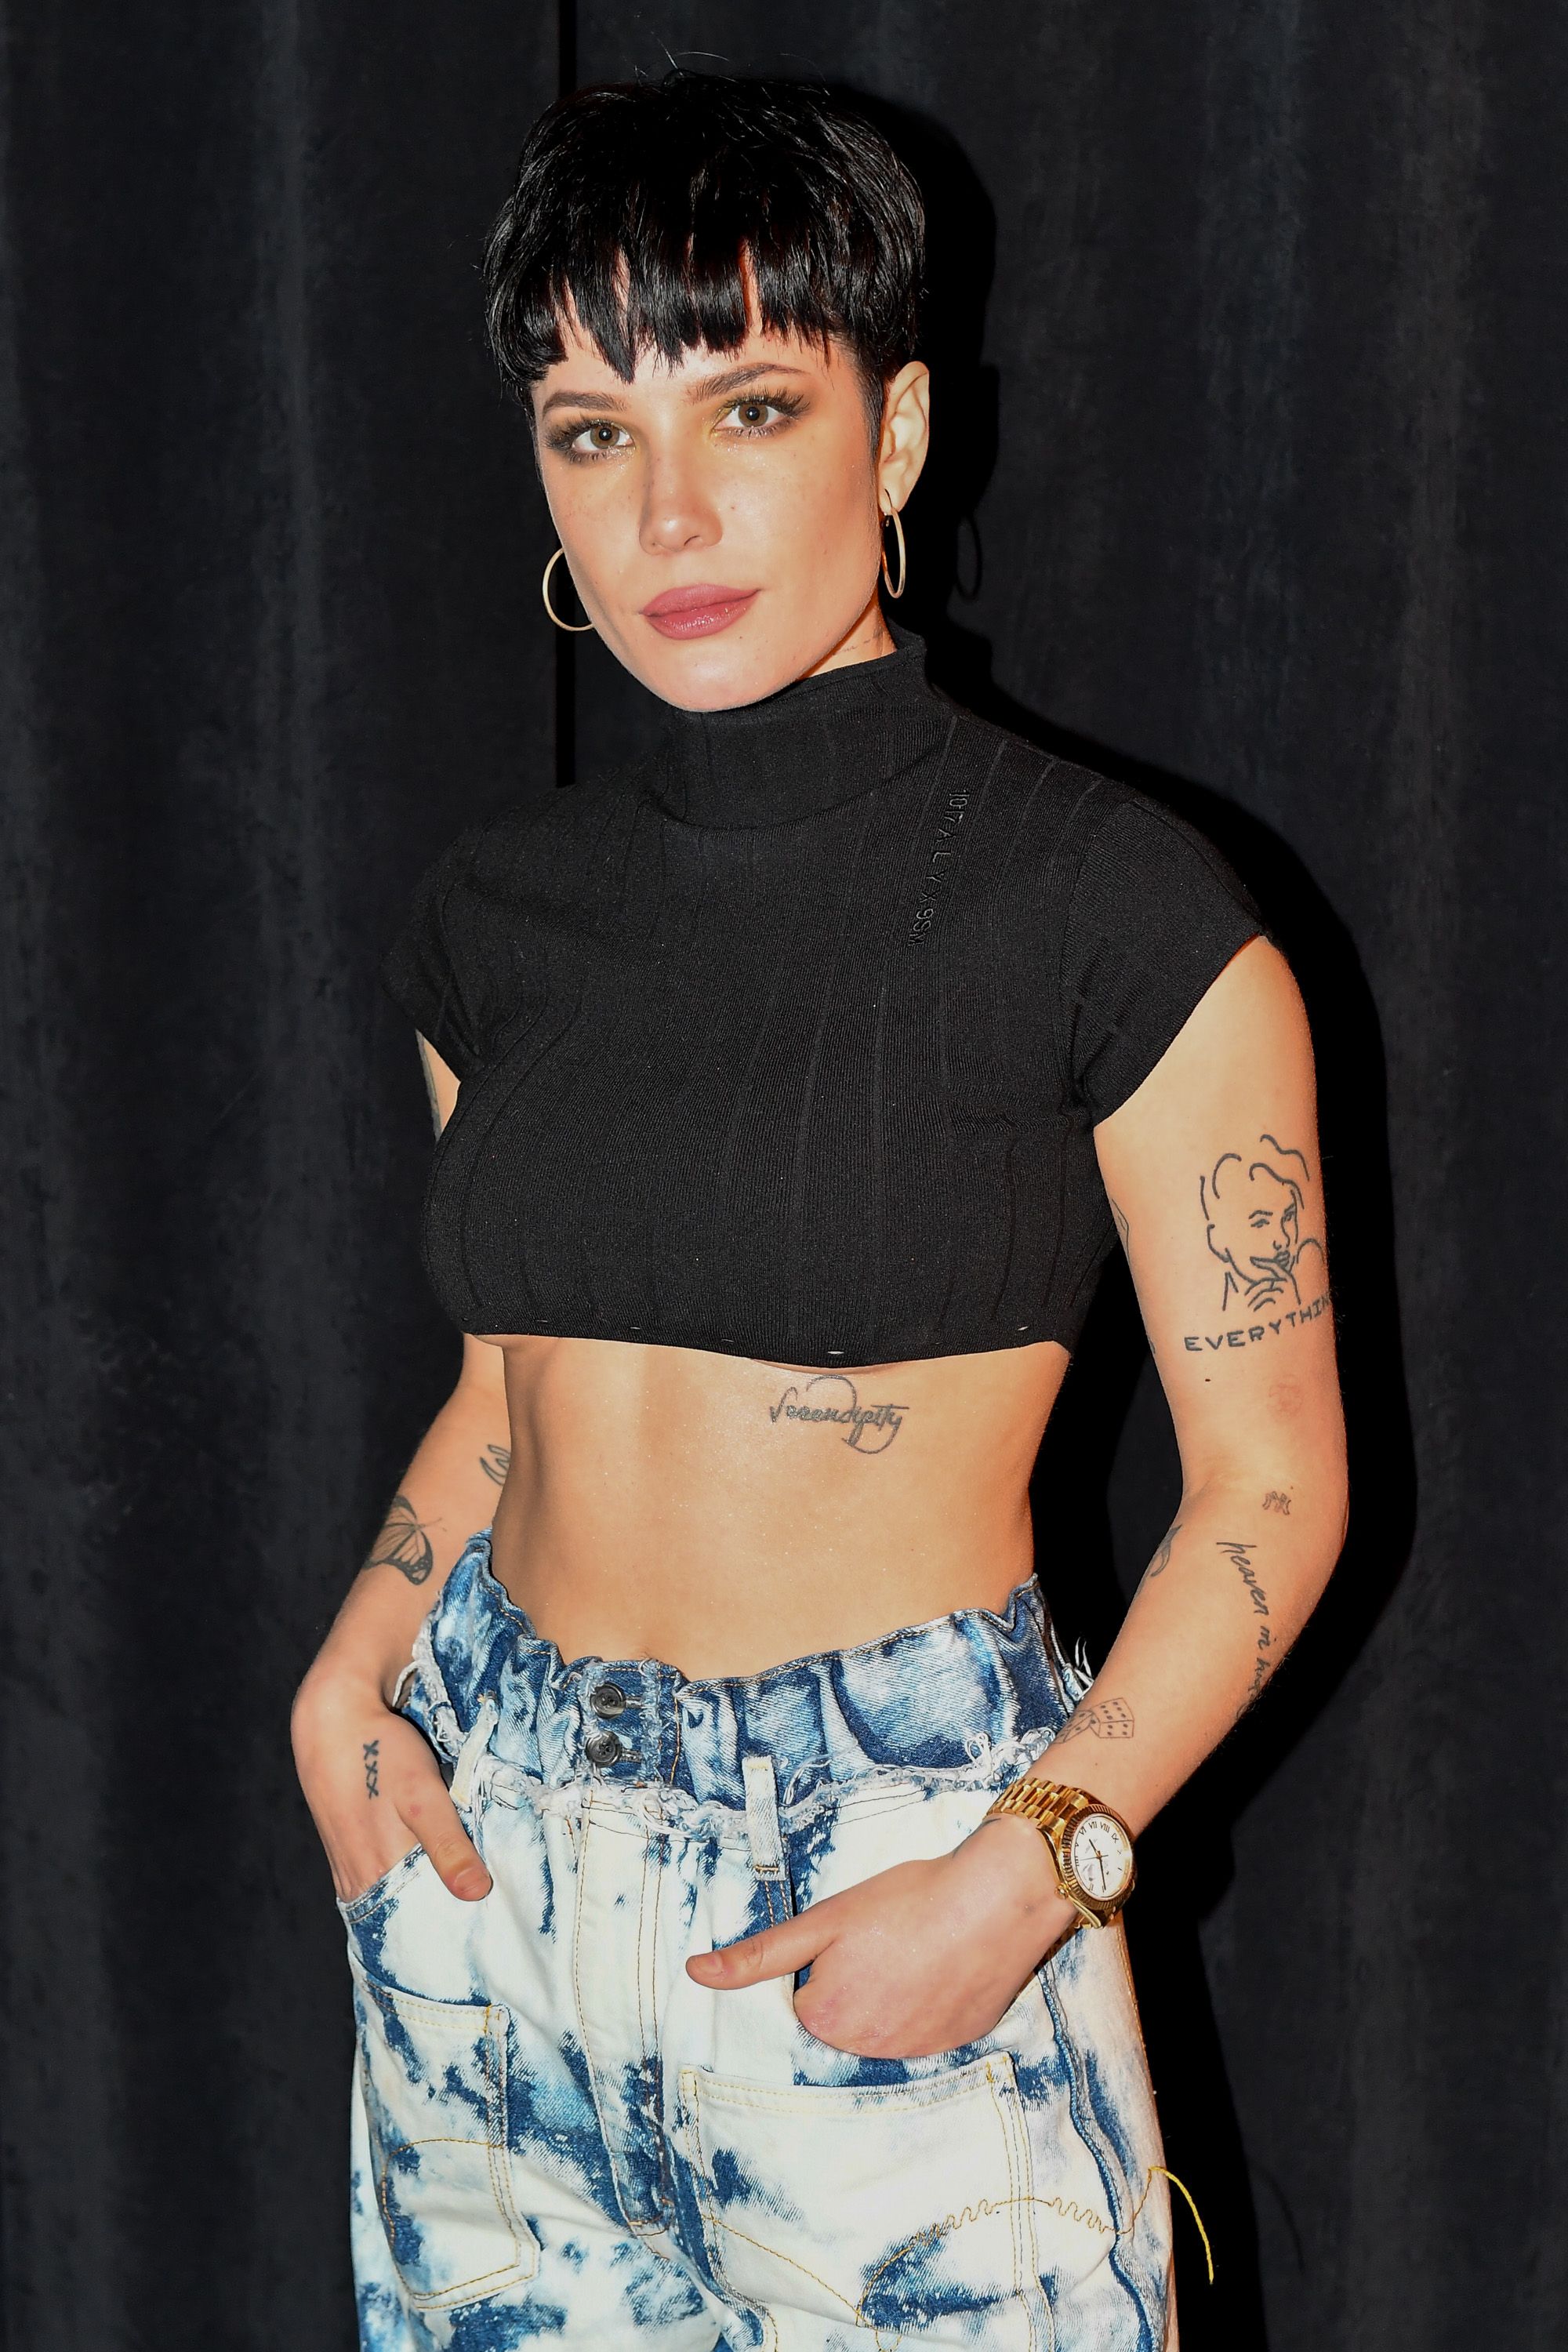 Halsey at a basketball game between the Los Angeles Lakers and the Cleveland Cavaliers on January 13, 2020, in Los Angeles, California | Photo: Allen Berezovsky/Getty Images